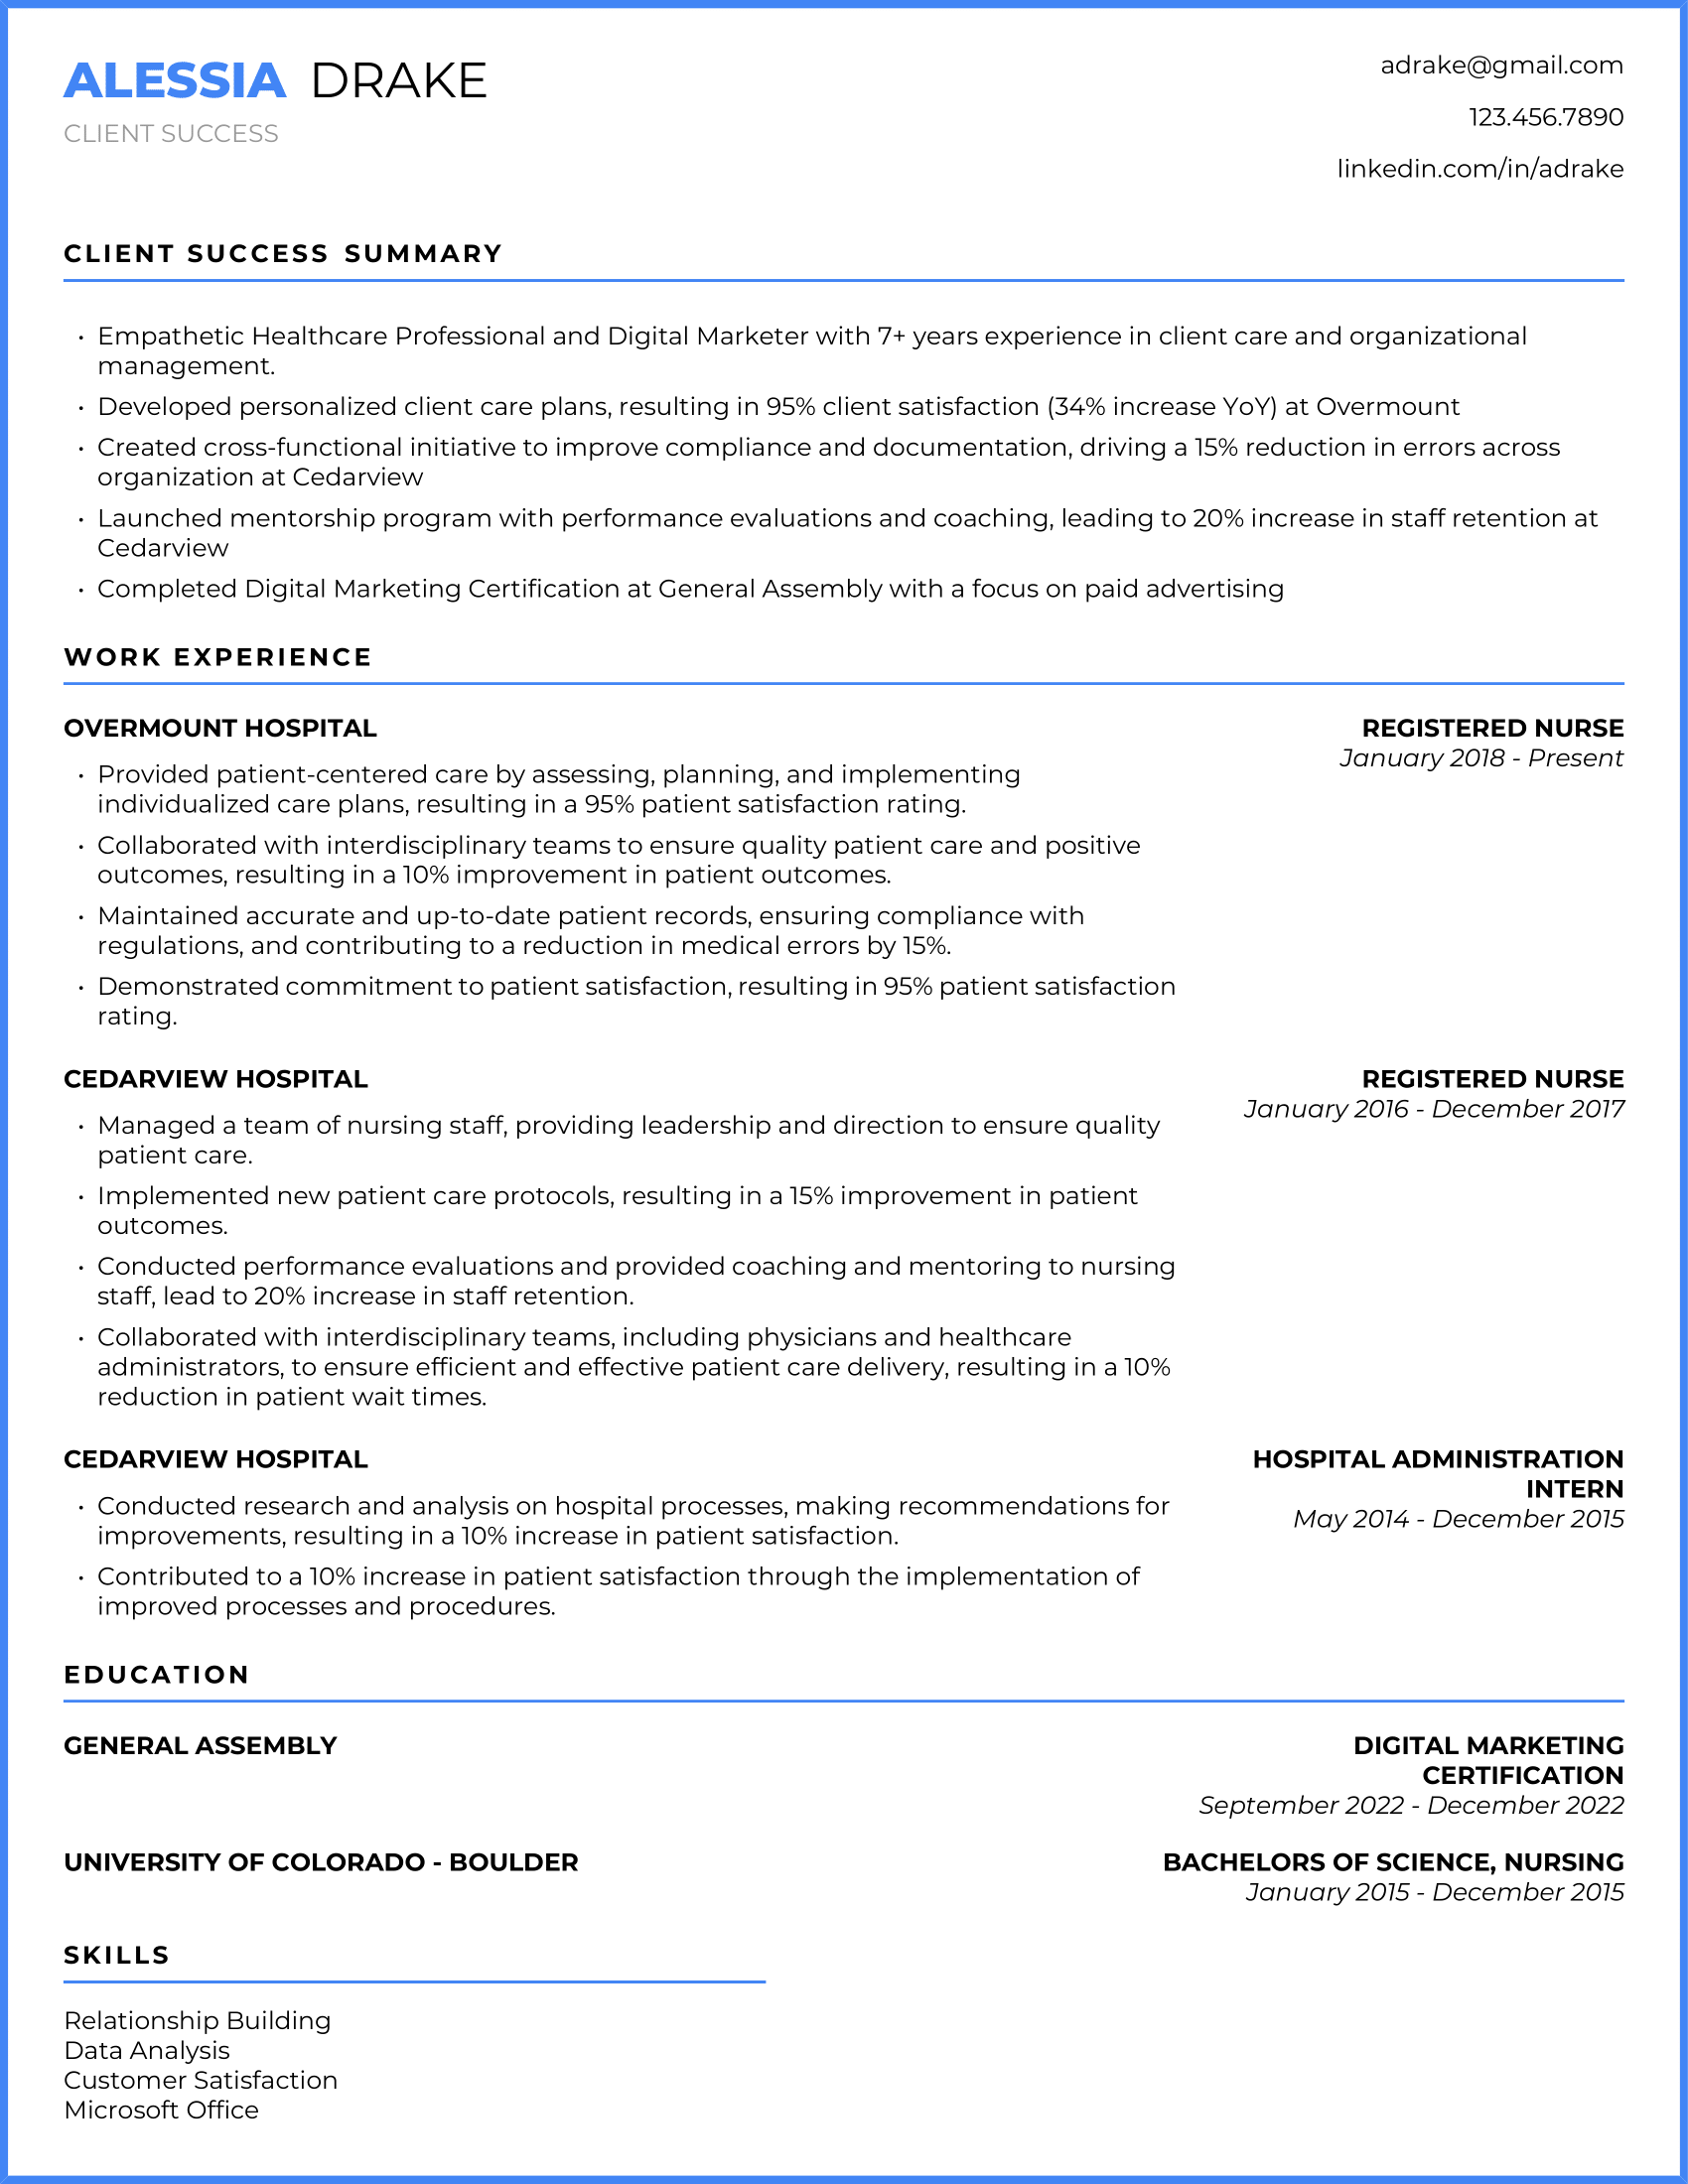 Account Manager Resume Example #2 - Non-Traditional Background